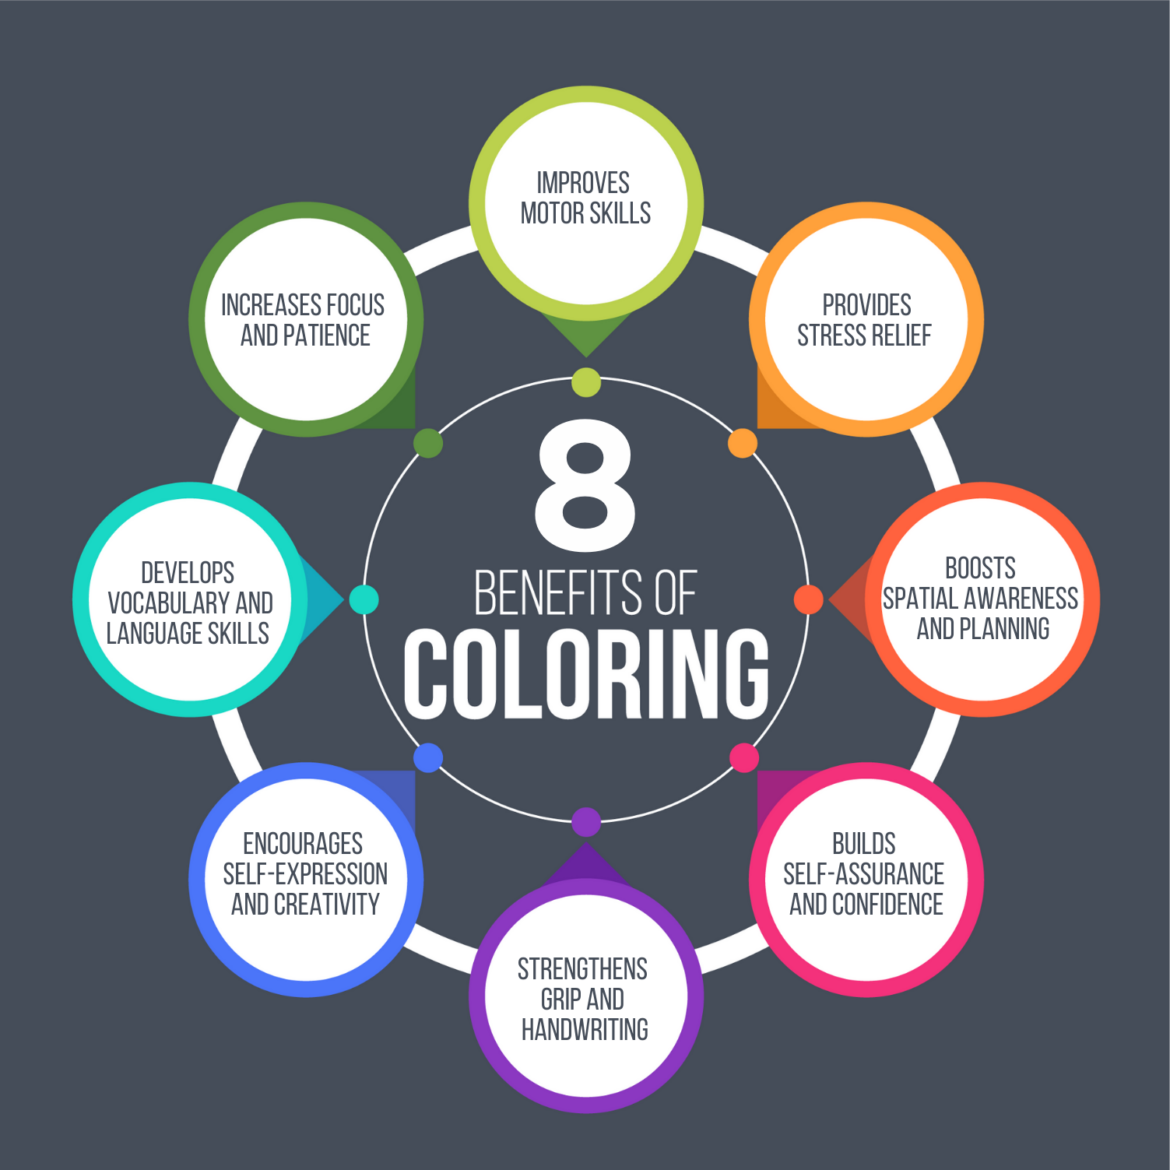 Benefits of Coloring